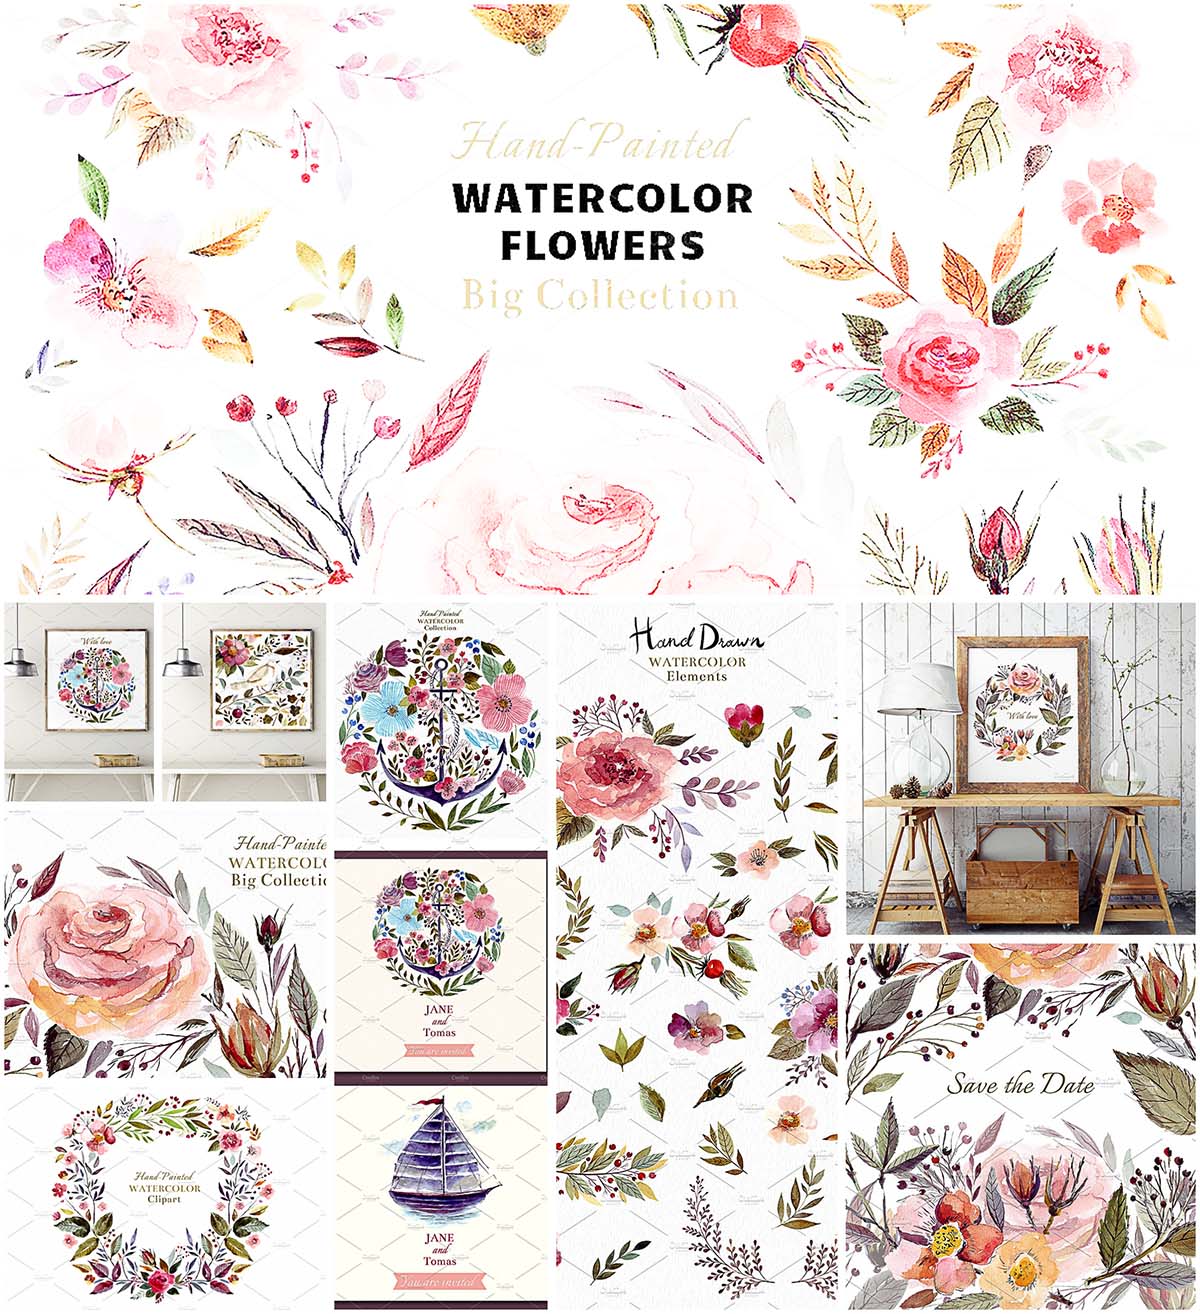 Huge watercolor floral illustrations collection